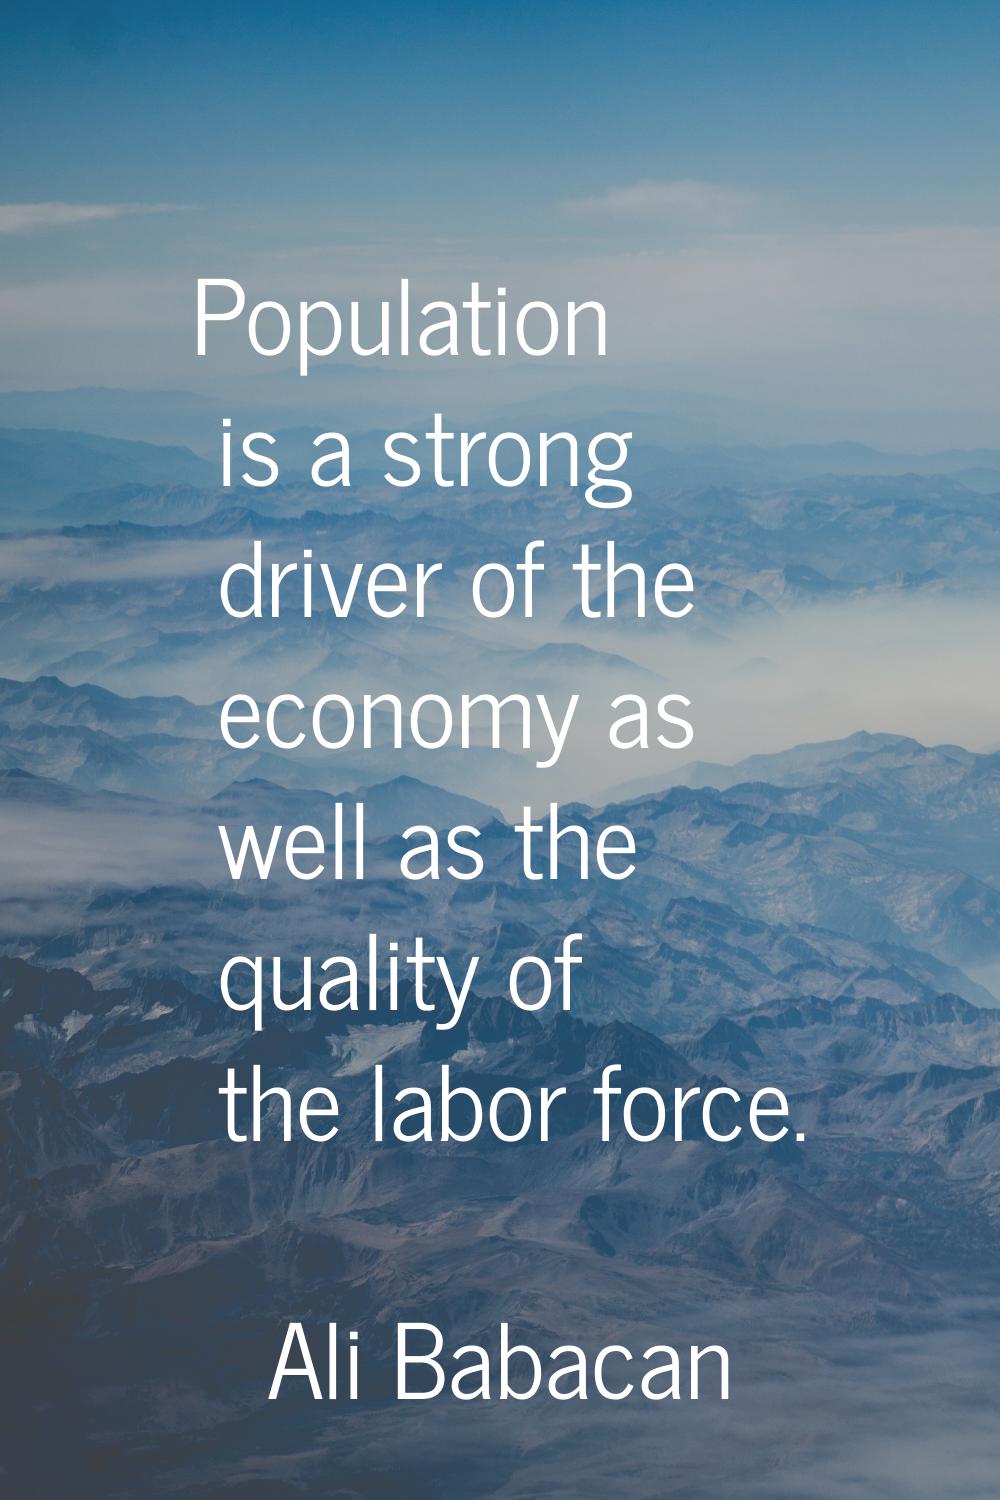 Population is a strong driver of the economy as well as the quality of the labor force.